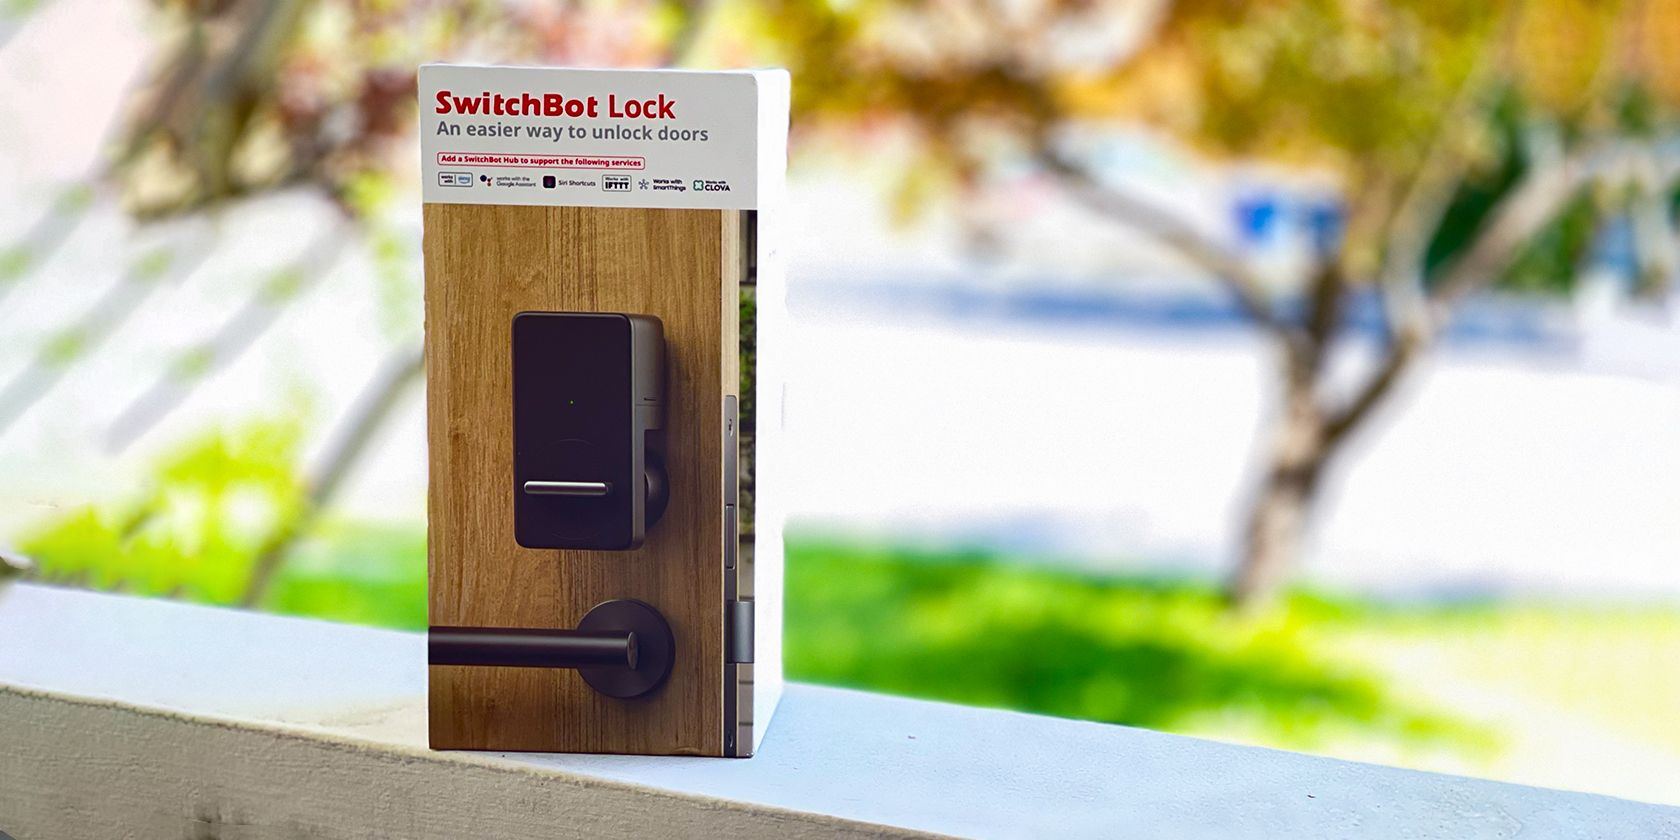 switchbot lock featured image